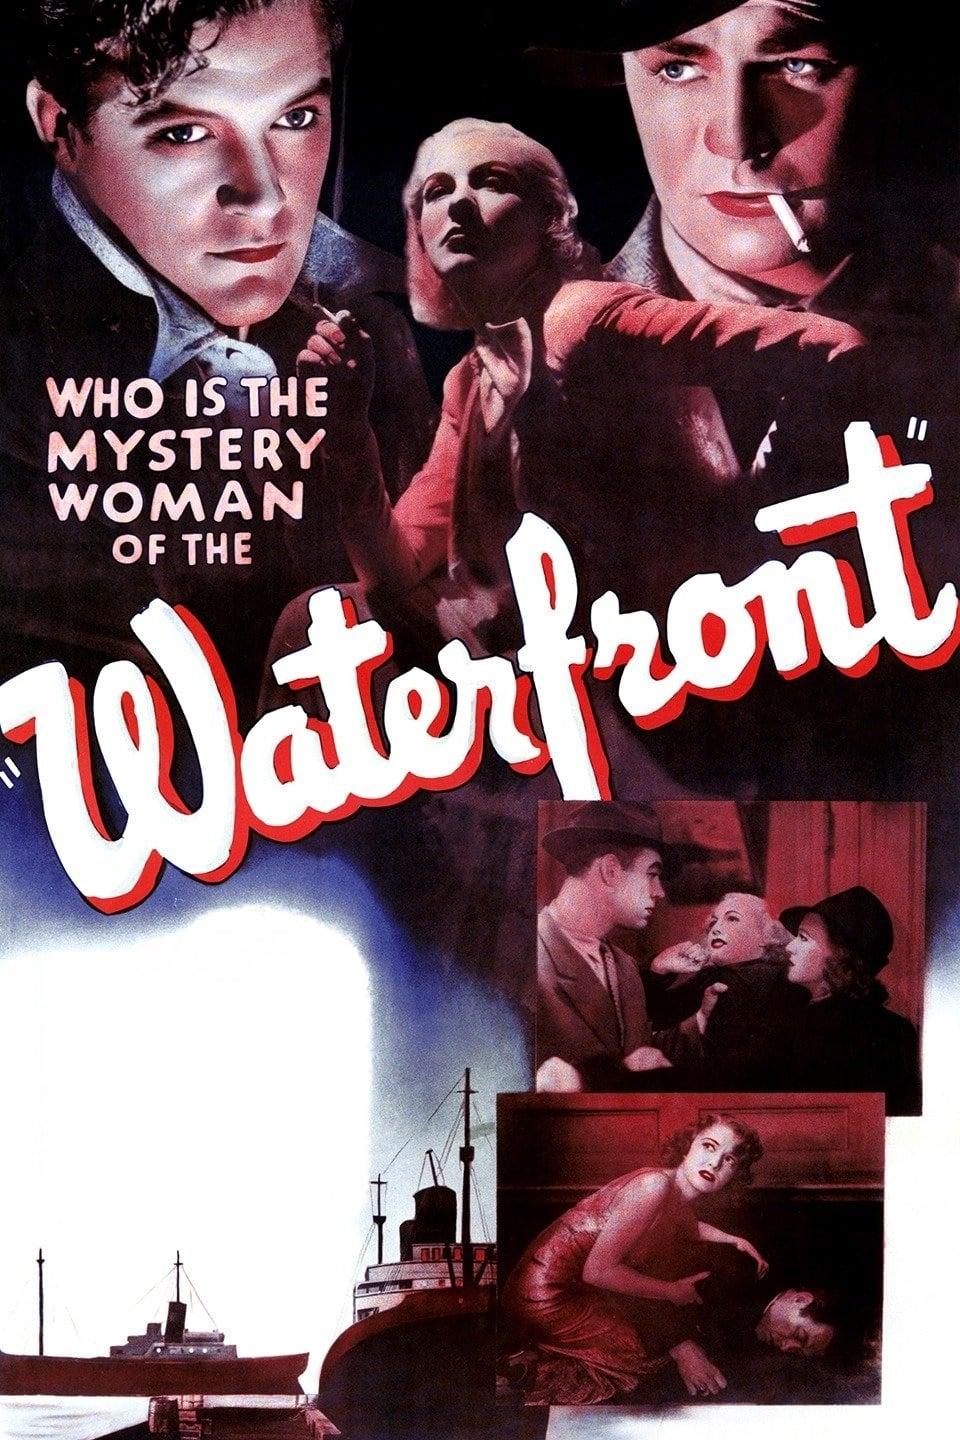 Waterfront poster